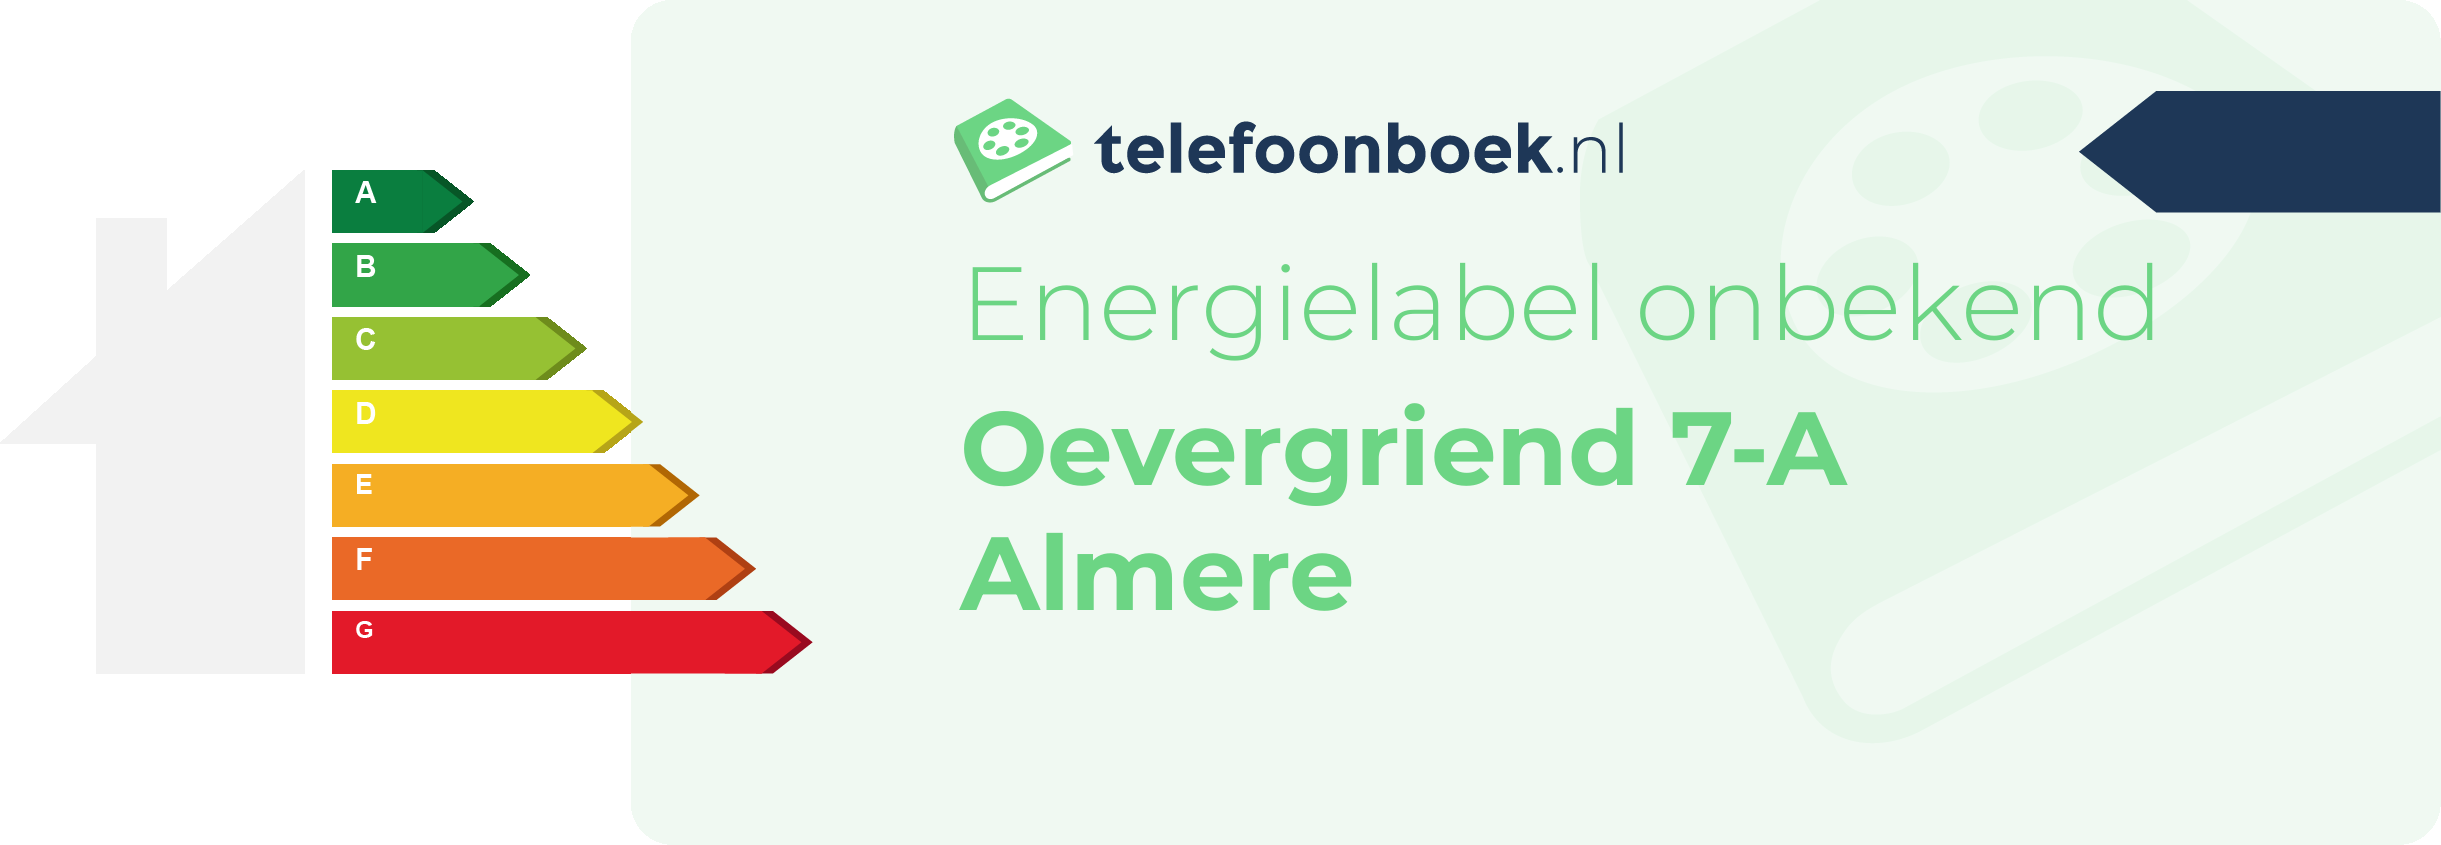 Energielabel Oevergriend 7-A Almere